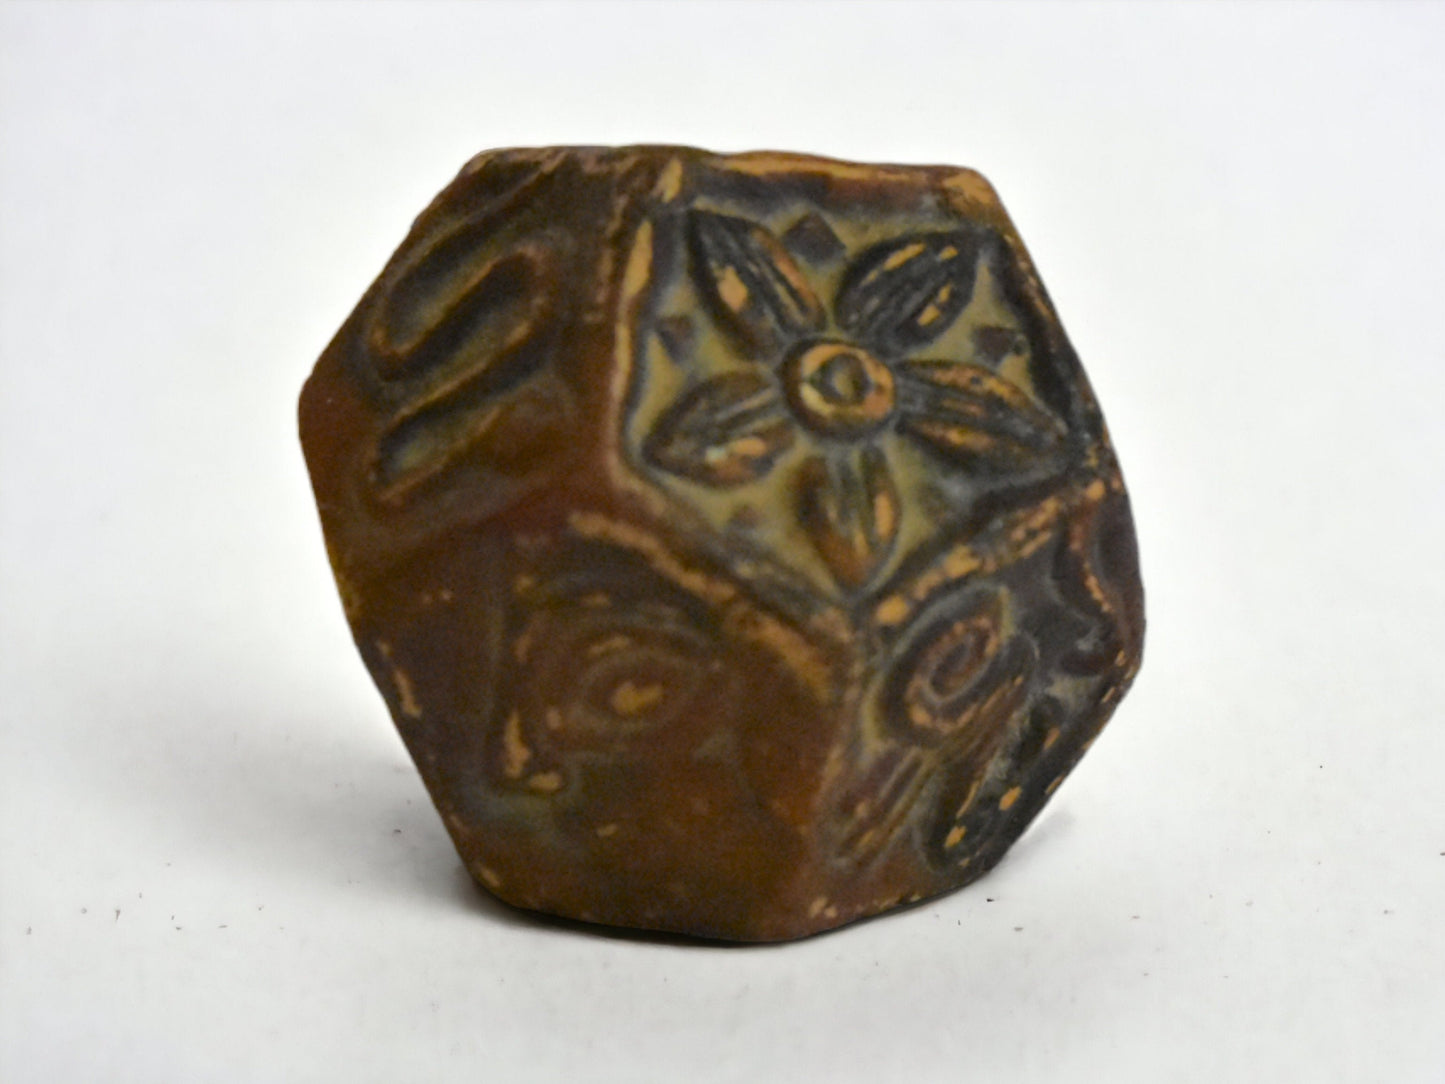 Love Dice - Fortune Telling Game - Inspired by Ancient Greek History and Mythology - With Instructions for Use - Ceramic Artifact